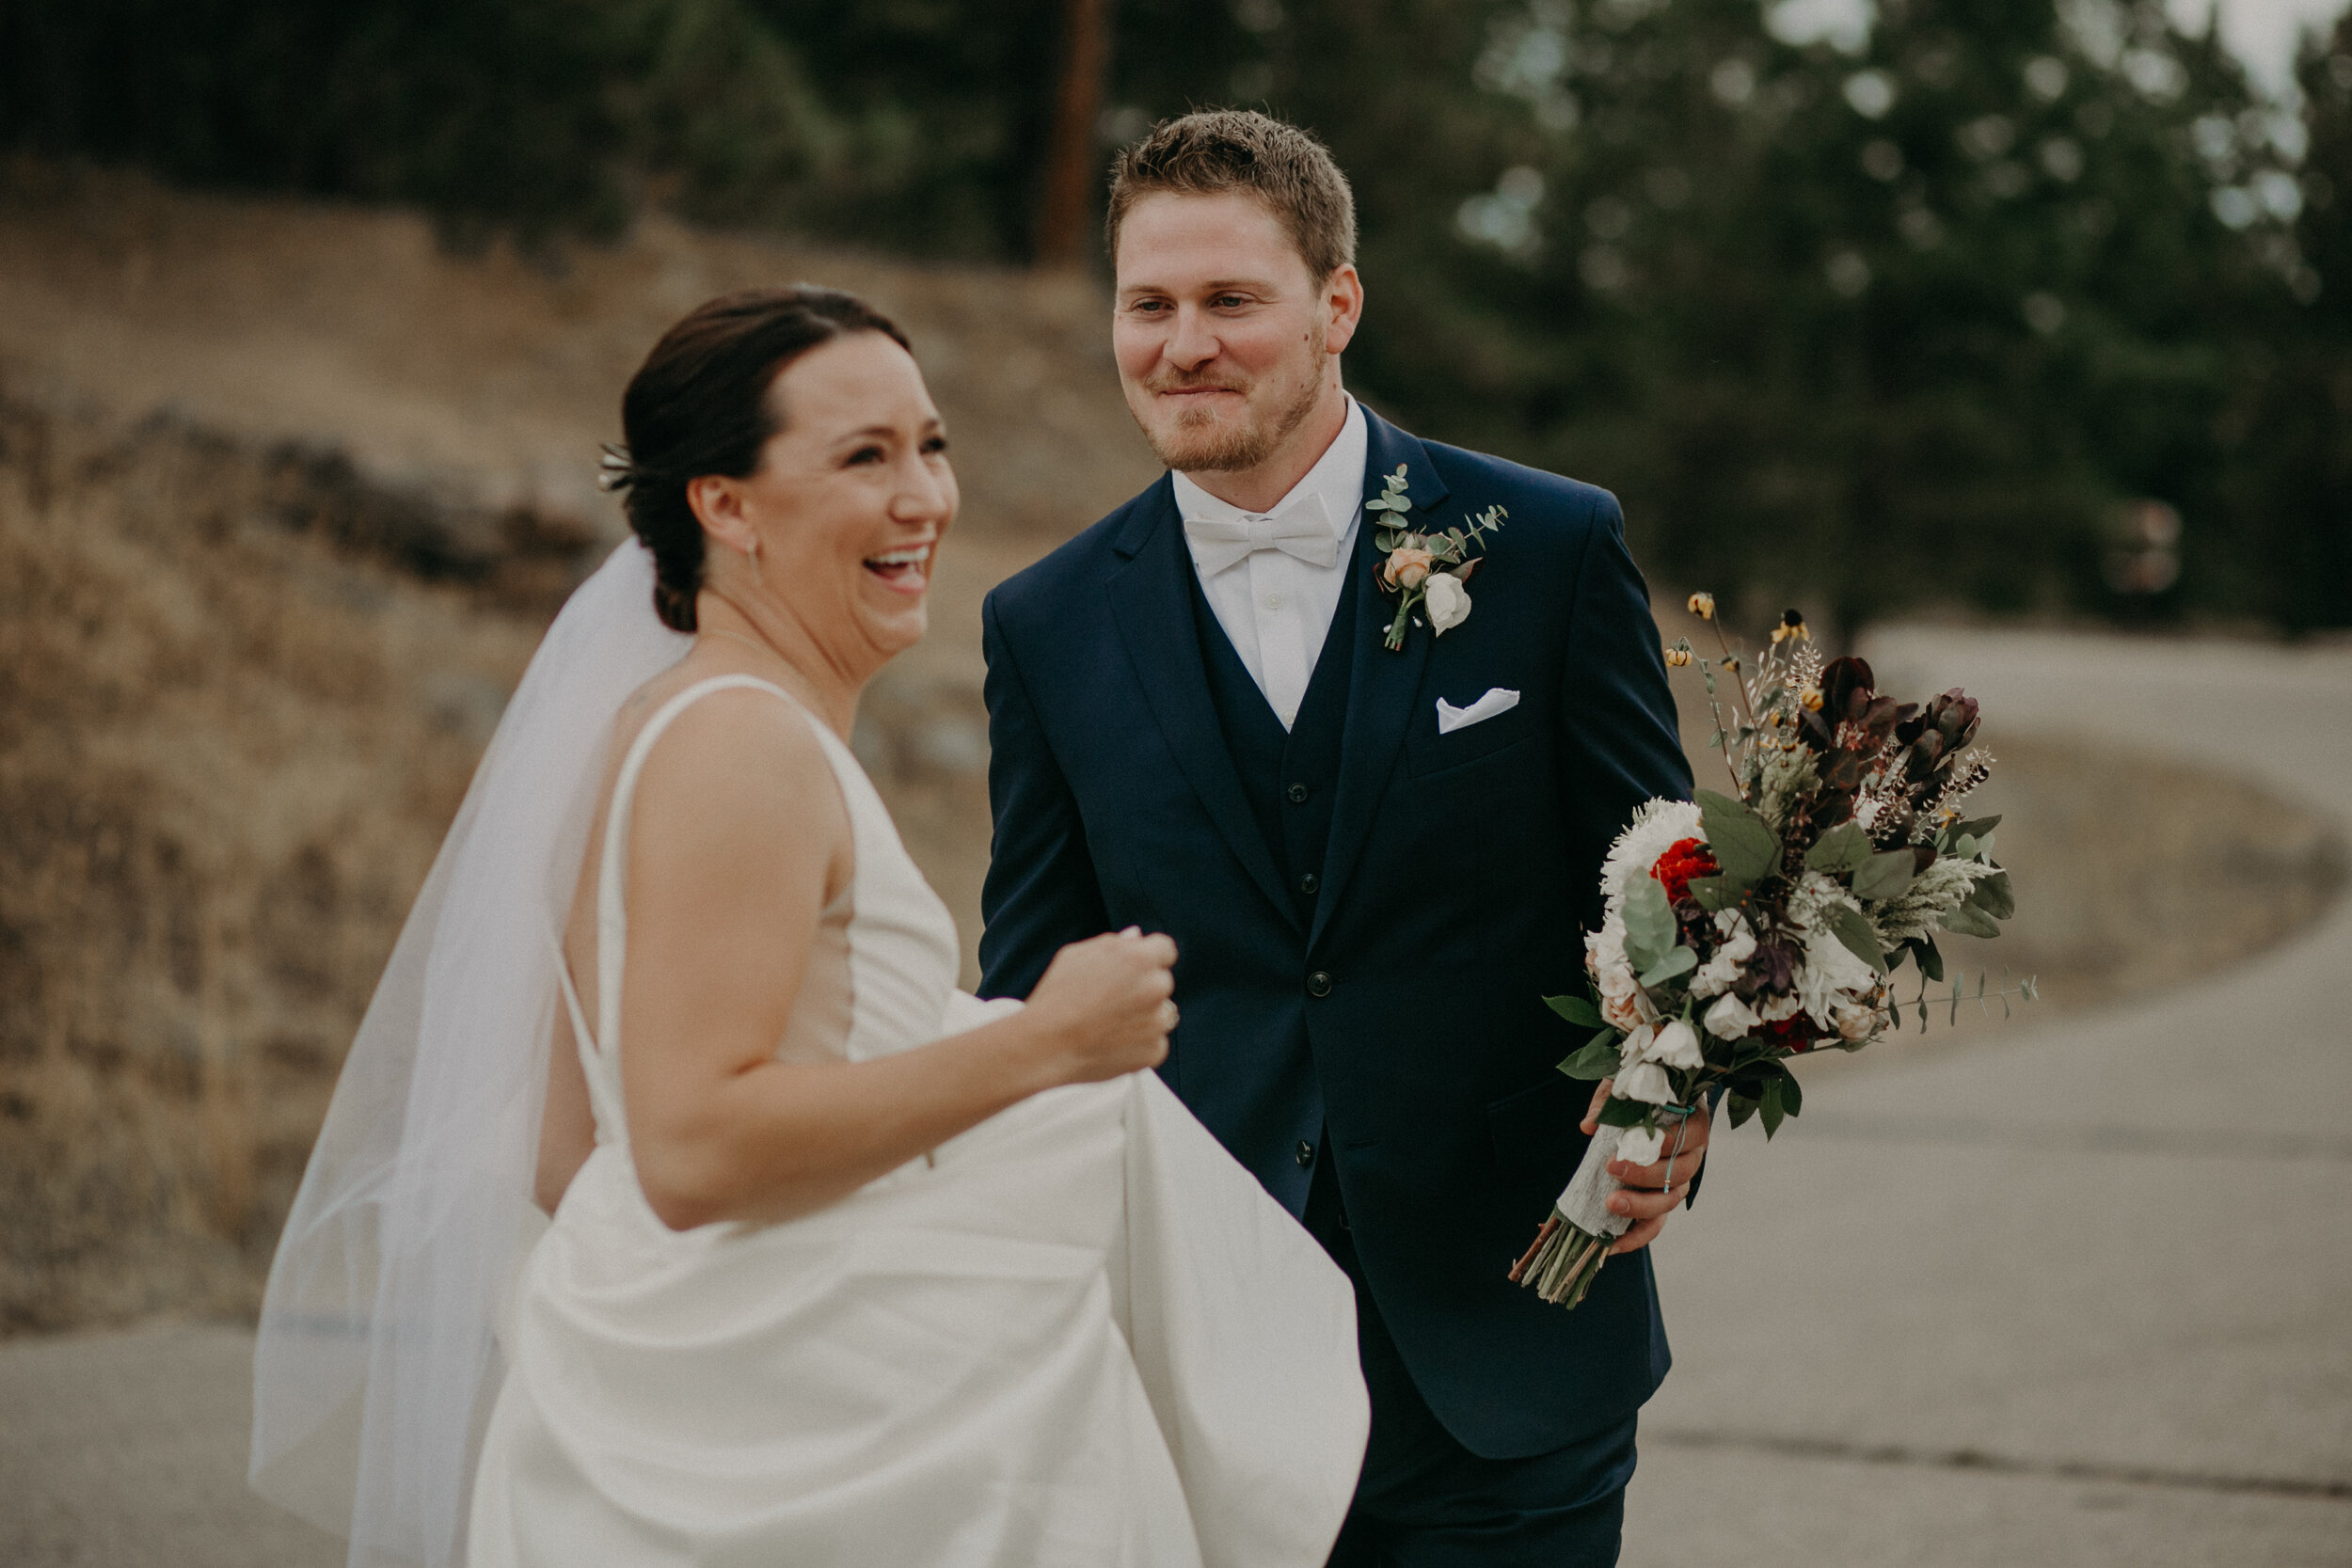  Boulder Co mountaintop elopement with Andrea Wagner Photography #bouldercoelopement #elopetocolorado #elopementphotographer #coloradoweddingphotographer #coloradoelopementphotographer #sunriseampitheatre #sunriseampitheatrewedding #sunriseamphitheat